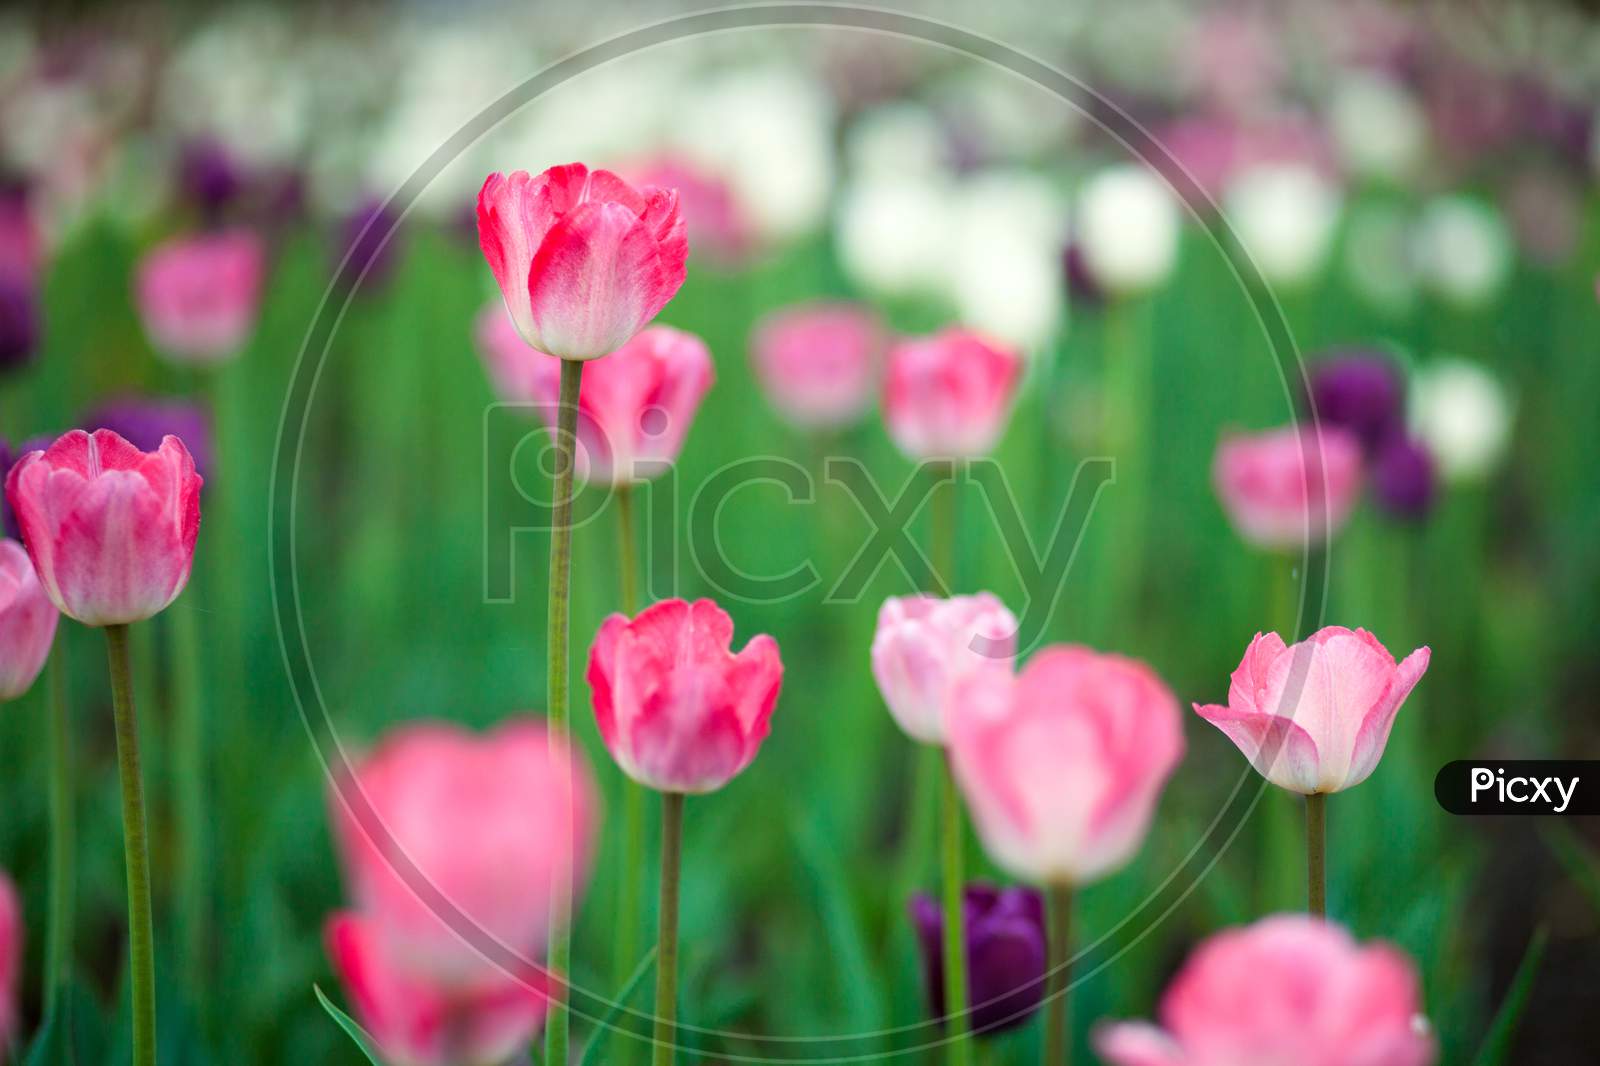 Close-Up Of A Field Of Pink And Spruce Tulips